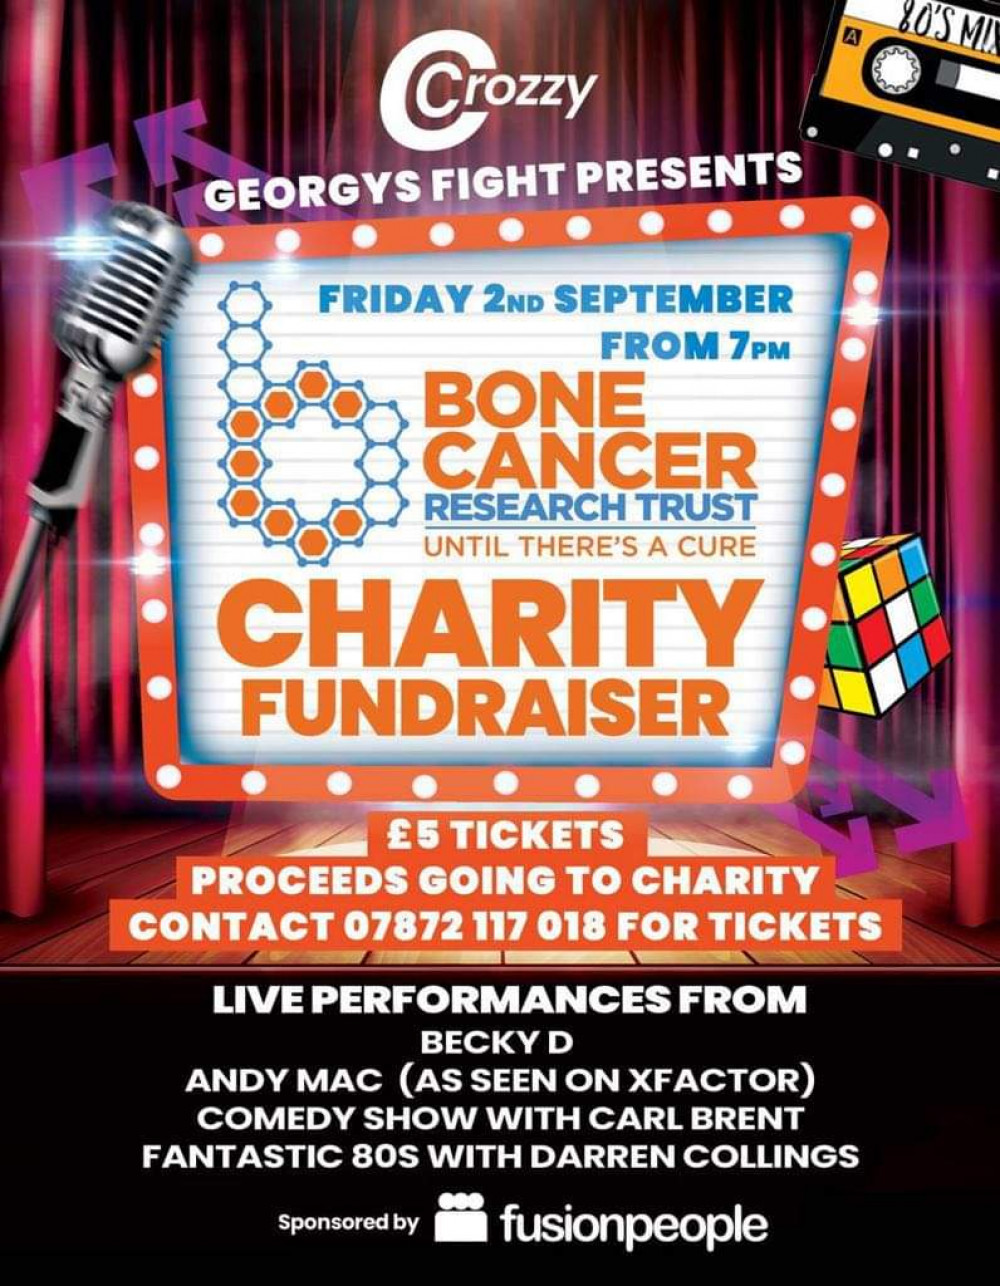 There is a charity fundraiser event for Georgy's fight live at The Crozzy on Friday (September 8).